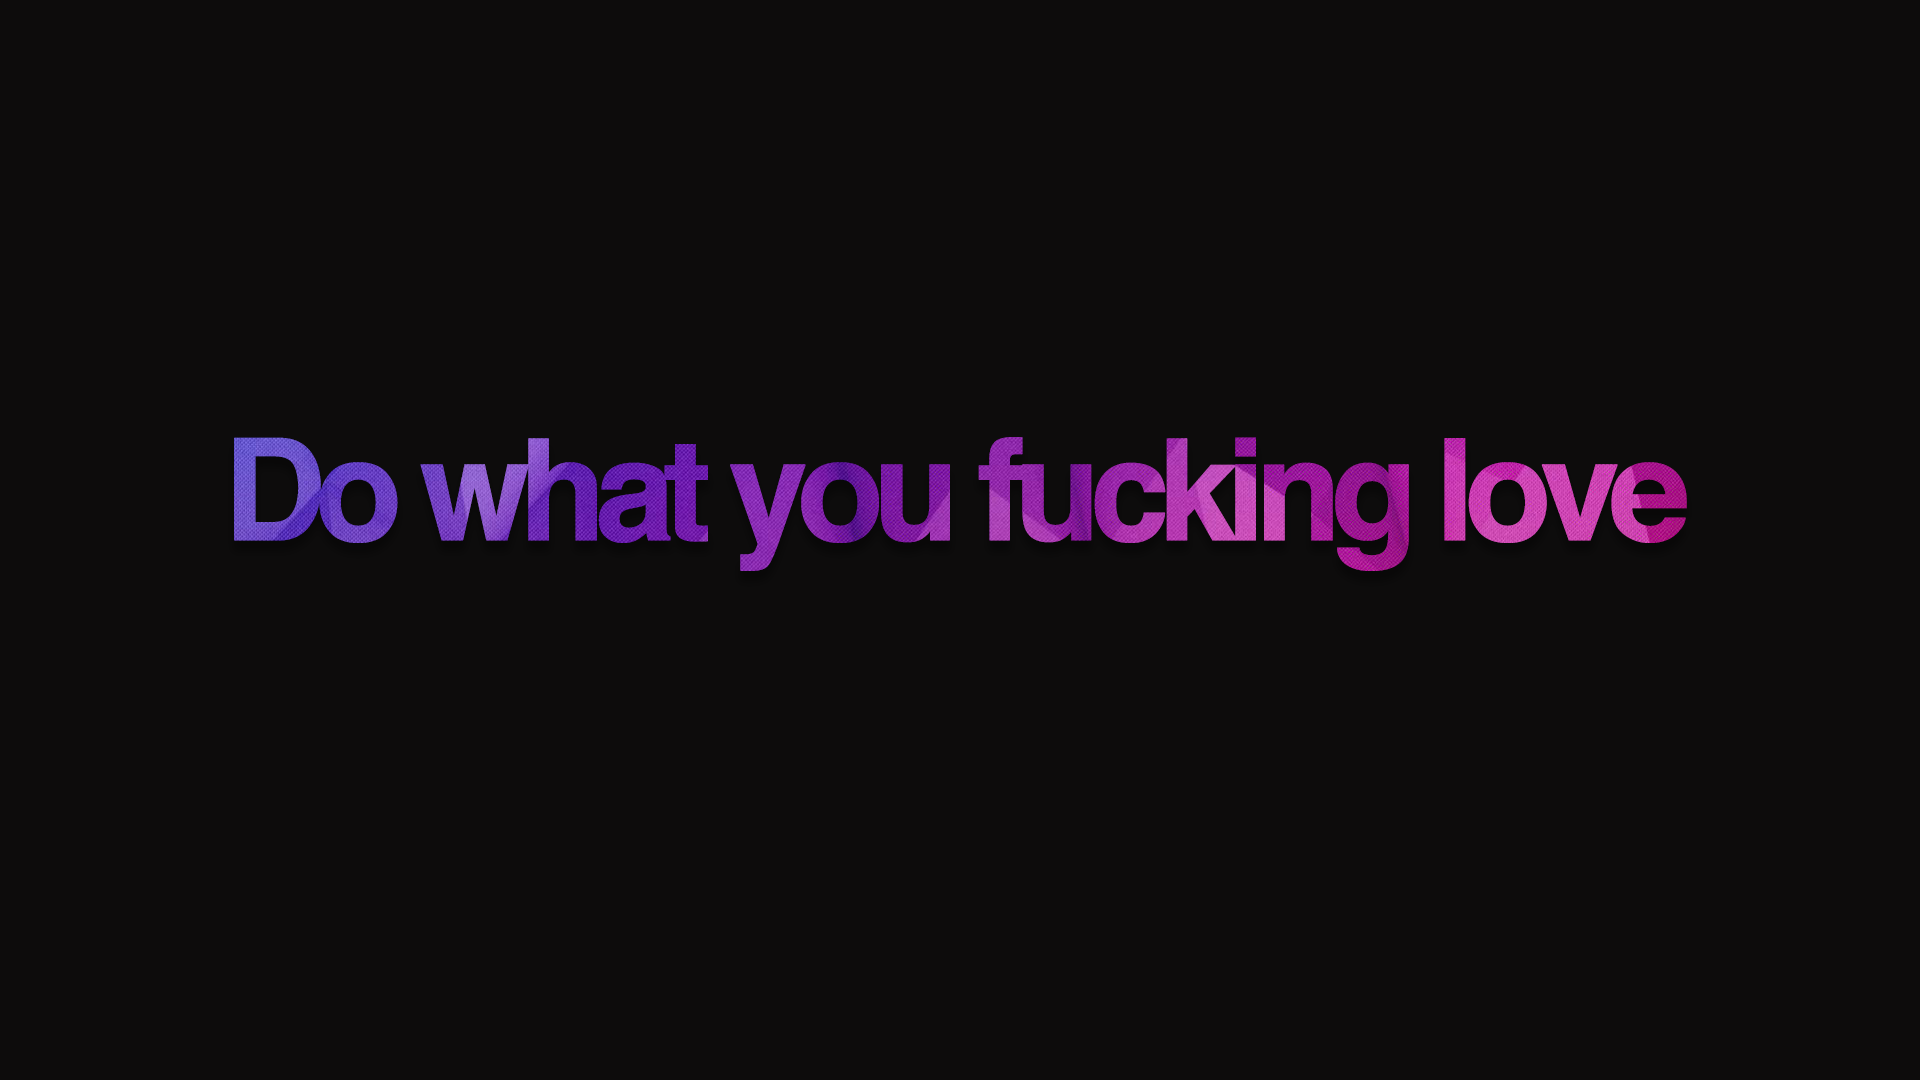 General 1920x1080 fuck text motivational minimalism black background simple background typography